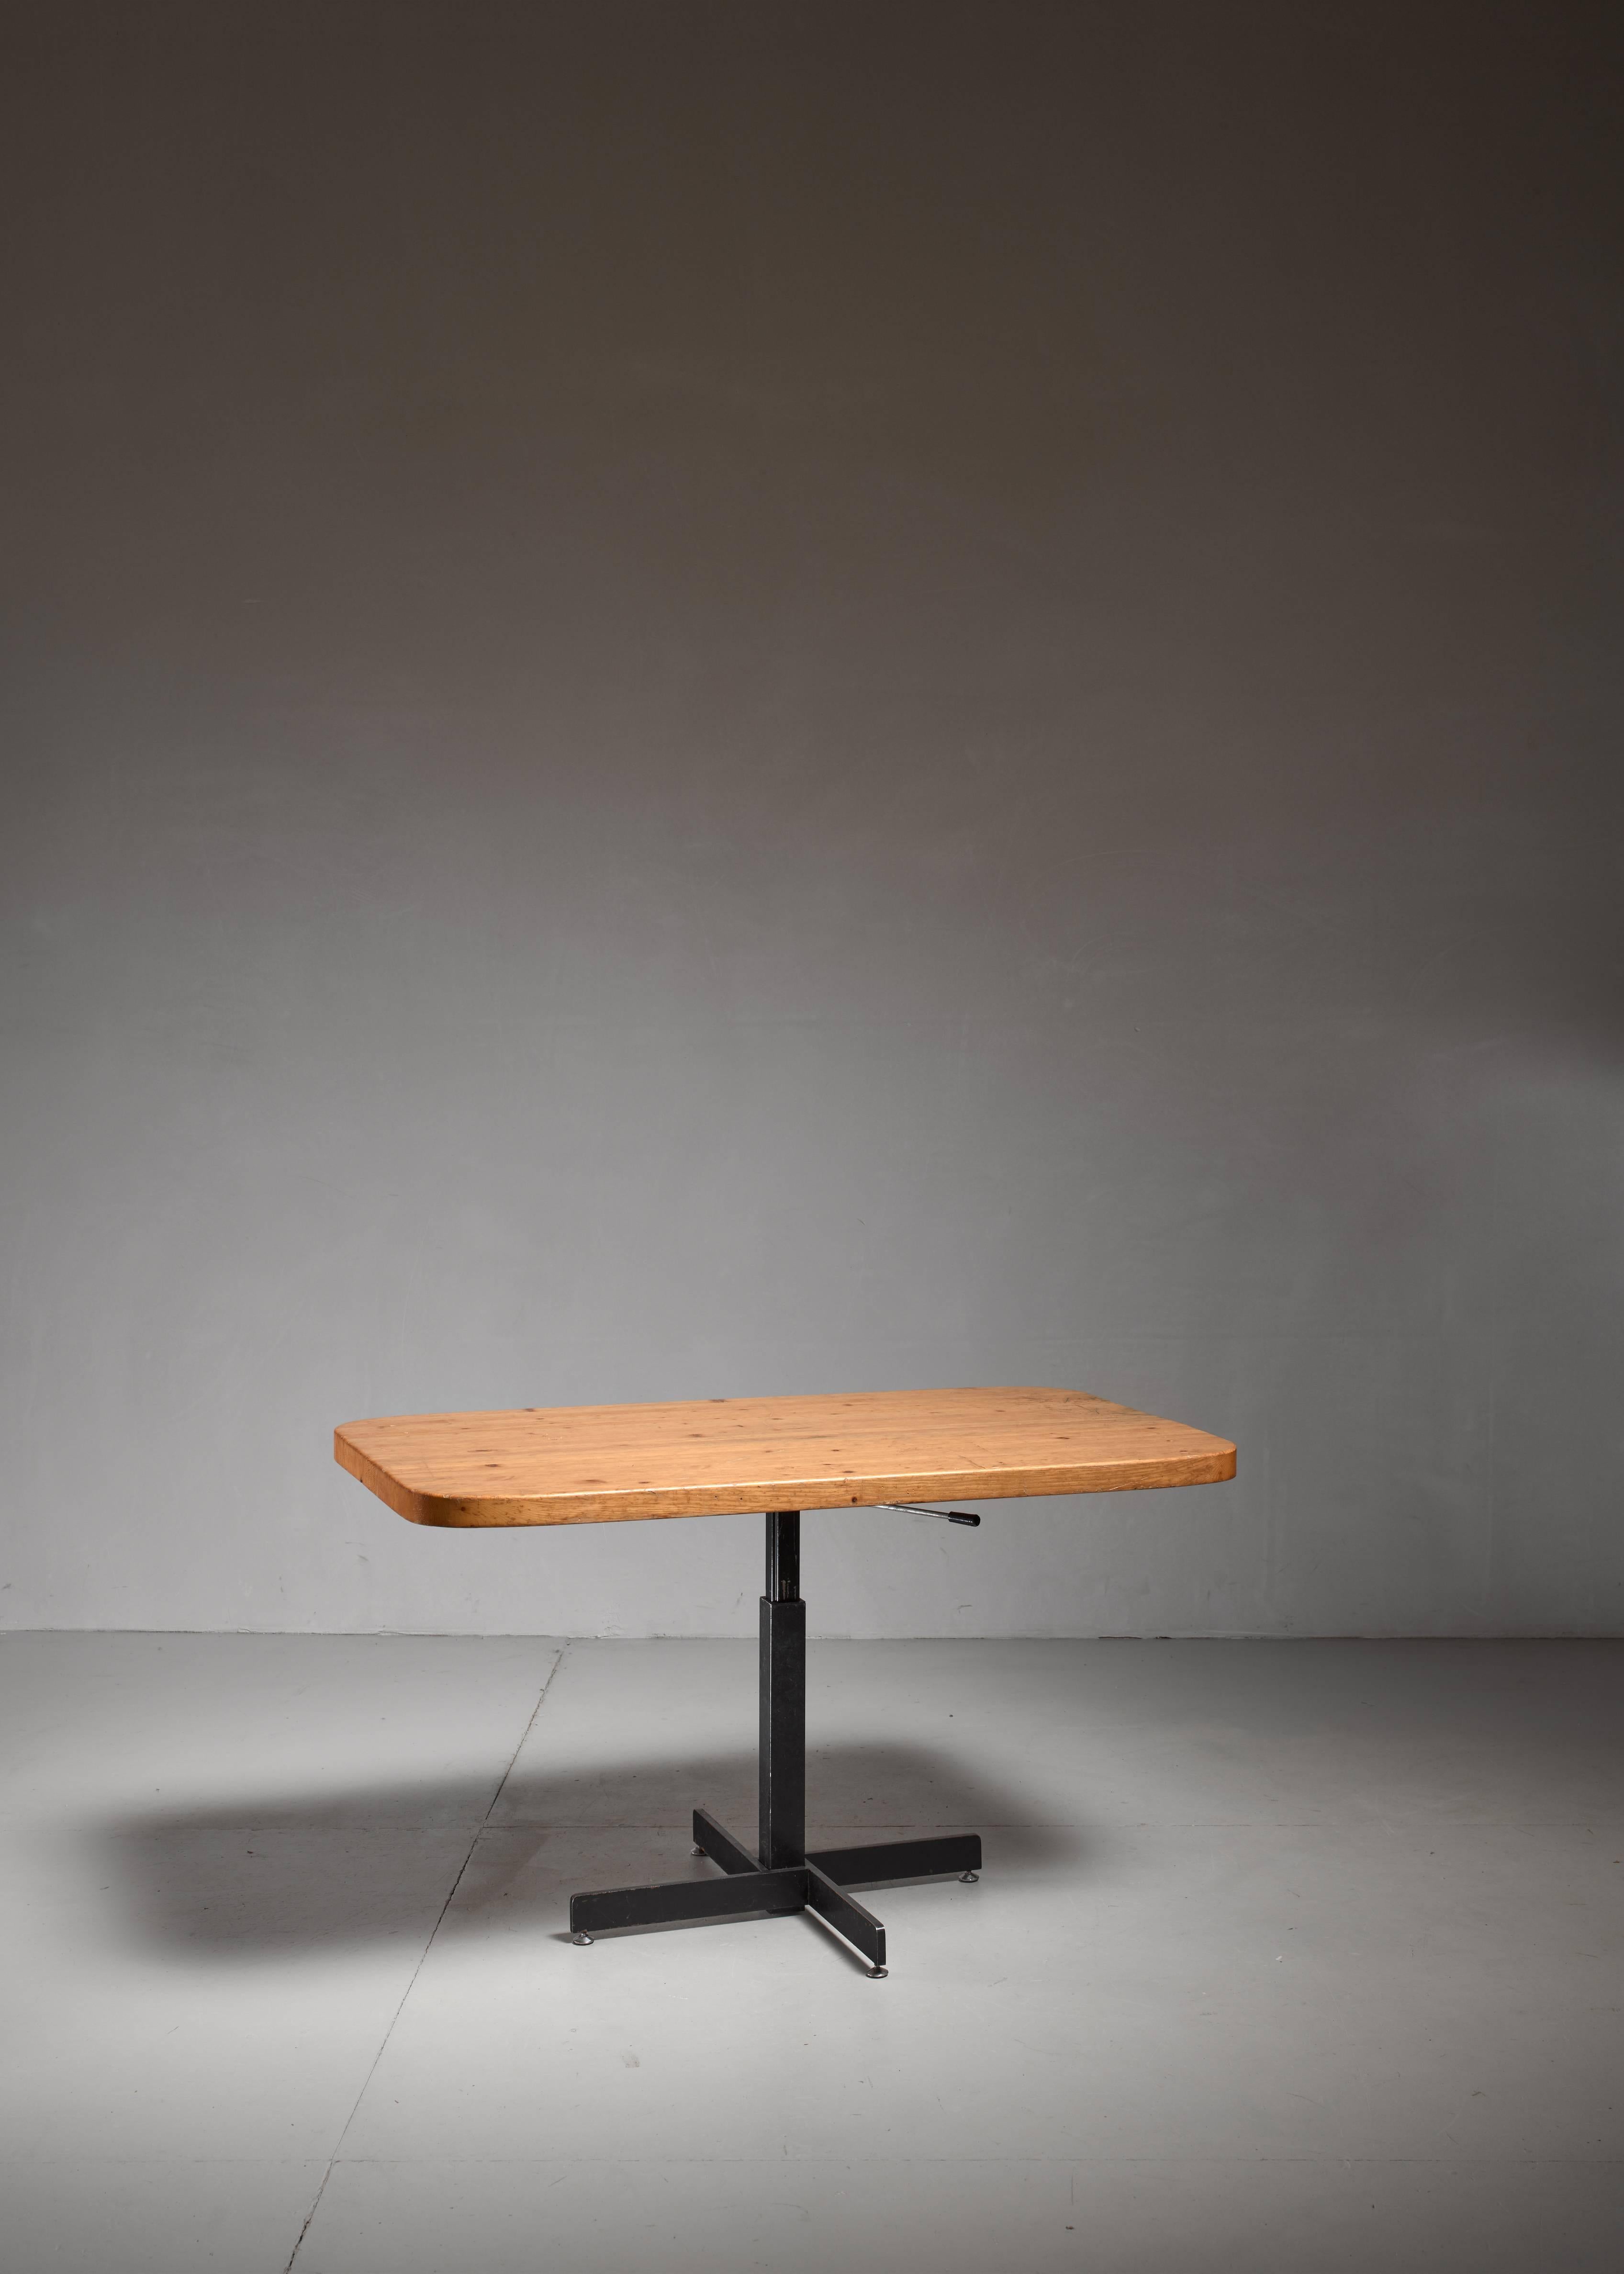 An early adjustable dining table by Charlotte Perriand, made of pine with black a black metal base. The height can vary between 52 and 71 cm.
The top has sawtooth connections and has beautifully aged from extensive usage.

The table was designed for